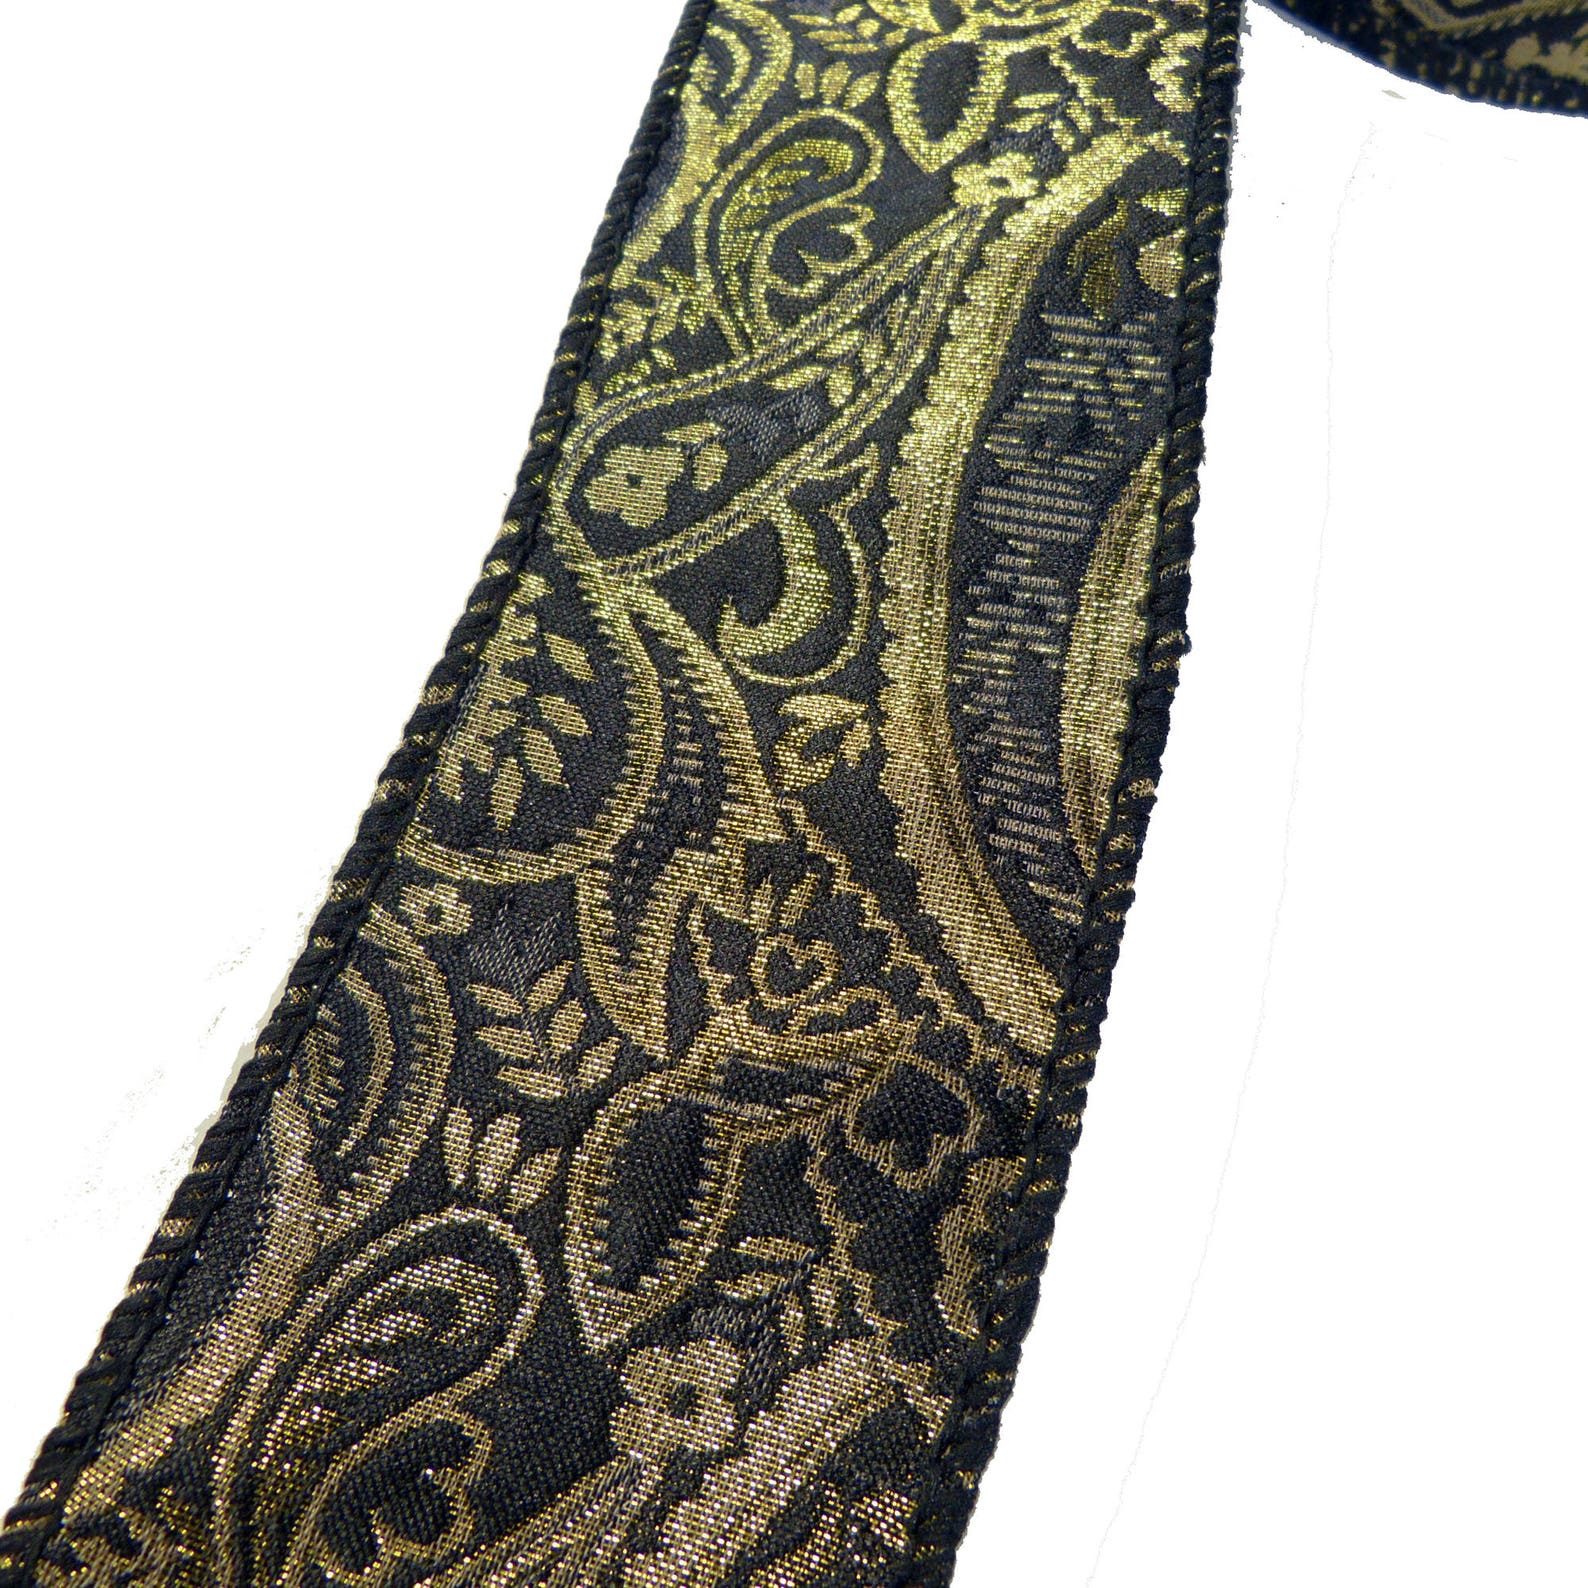 Black and Bronze Paisley Floral Wired Ribbon 2.5 Wide by | Etsy